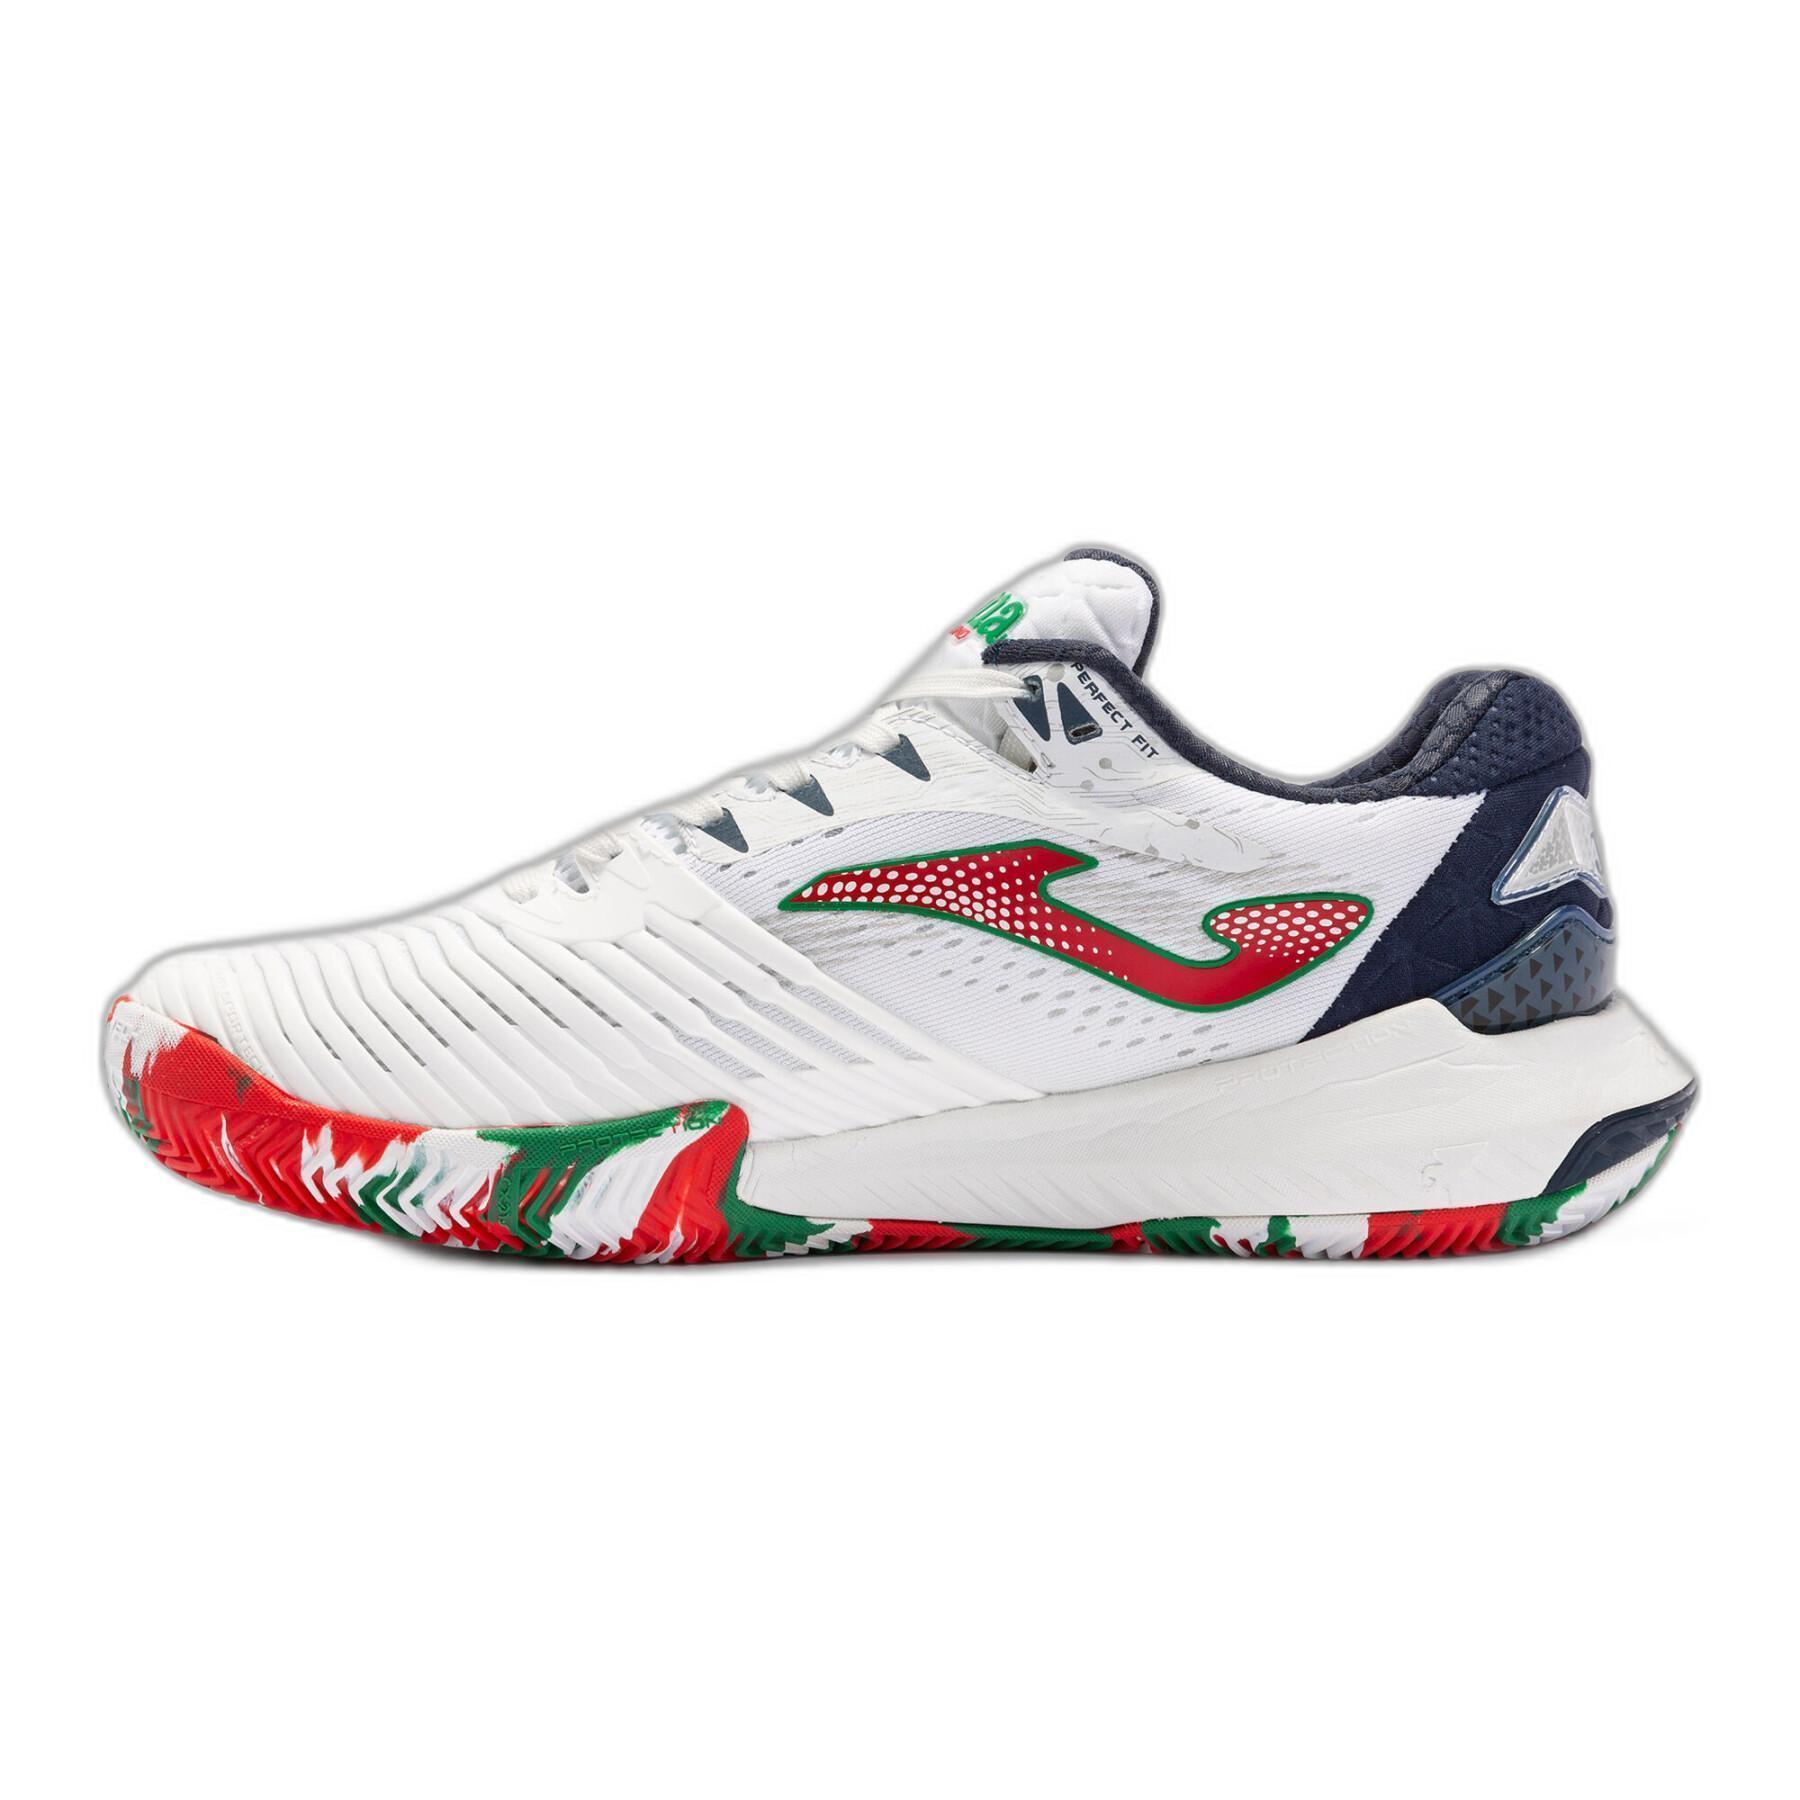 Paddle shoes Italie T.Fit 2202 2022/23